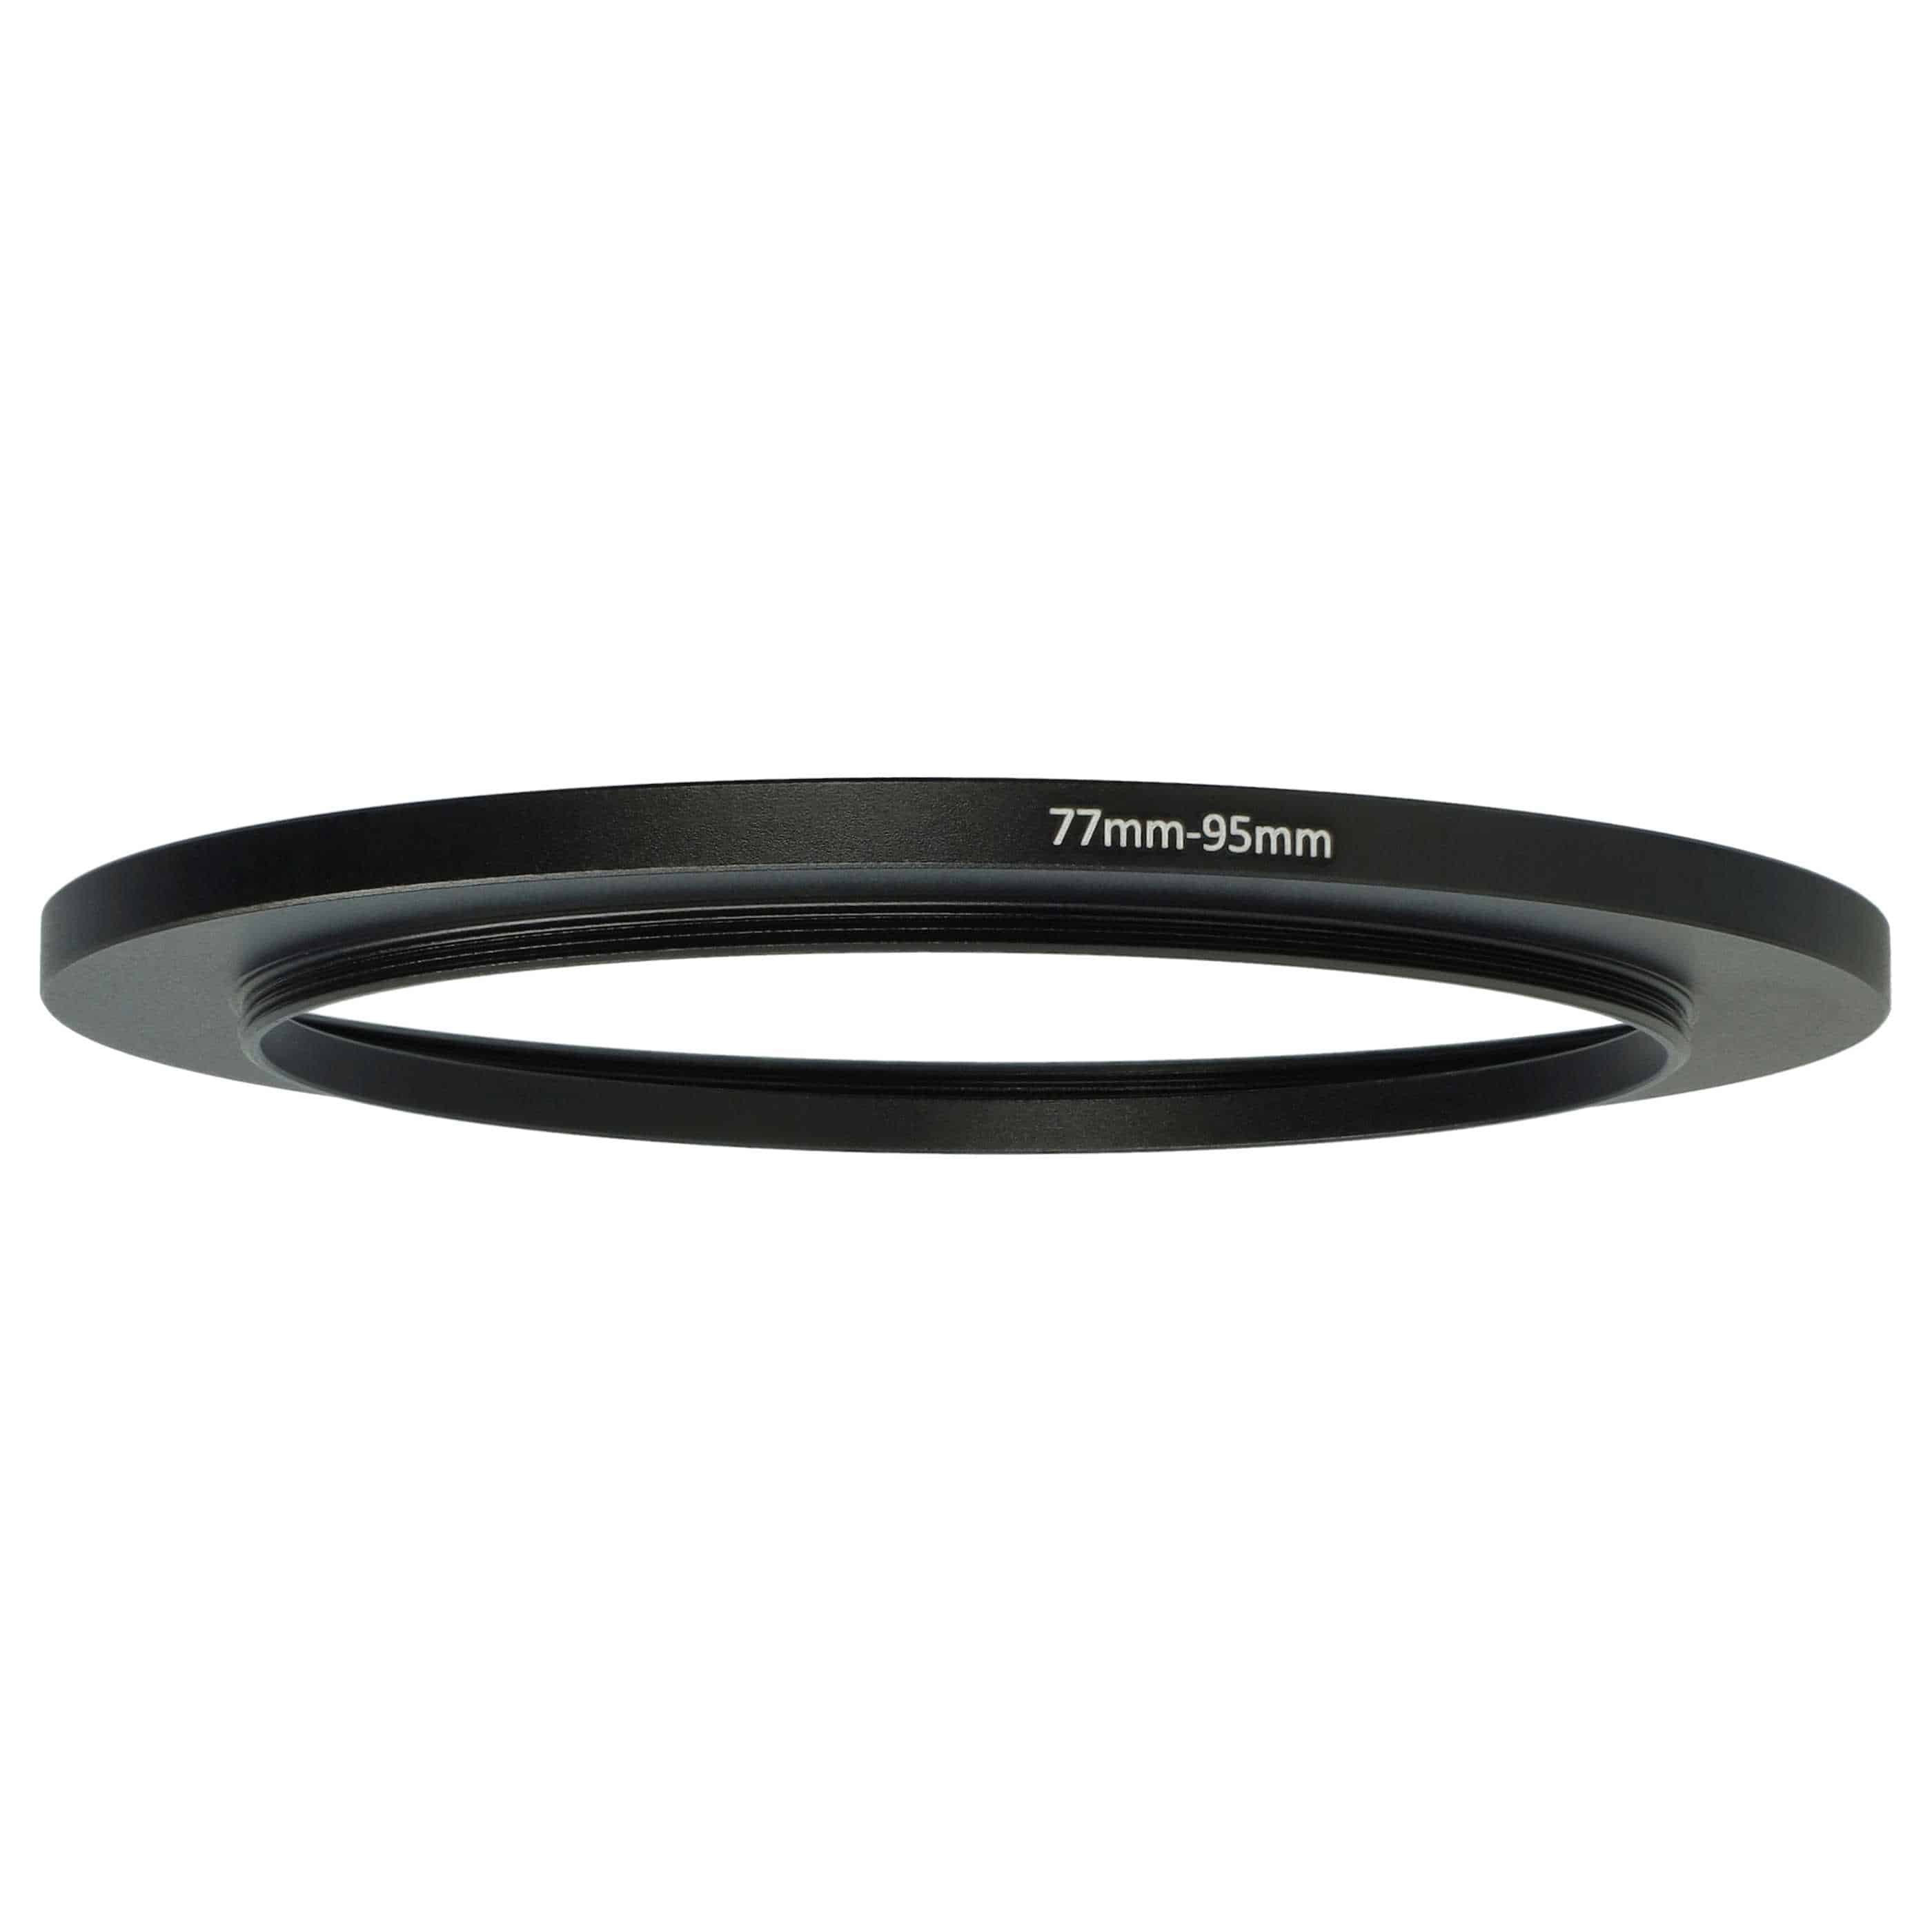 Step-Up Ring Adapter of 77 mm to 95 mmfor various Camera Lens - Filter Adapter